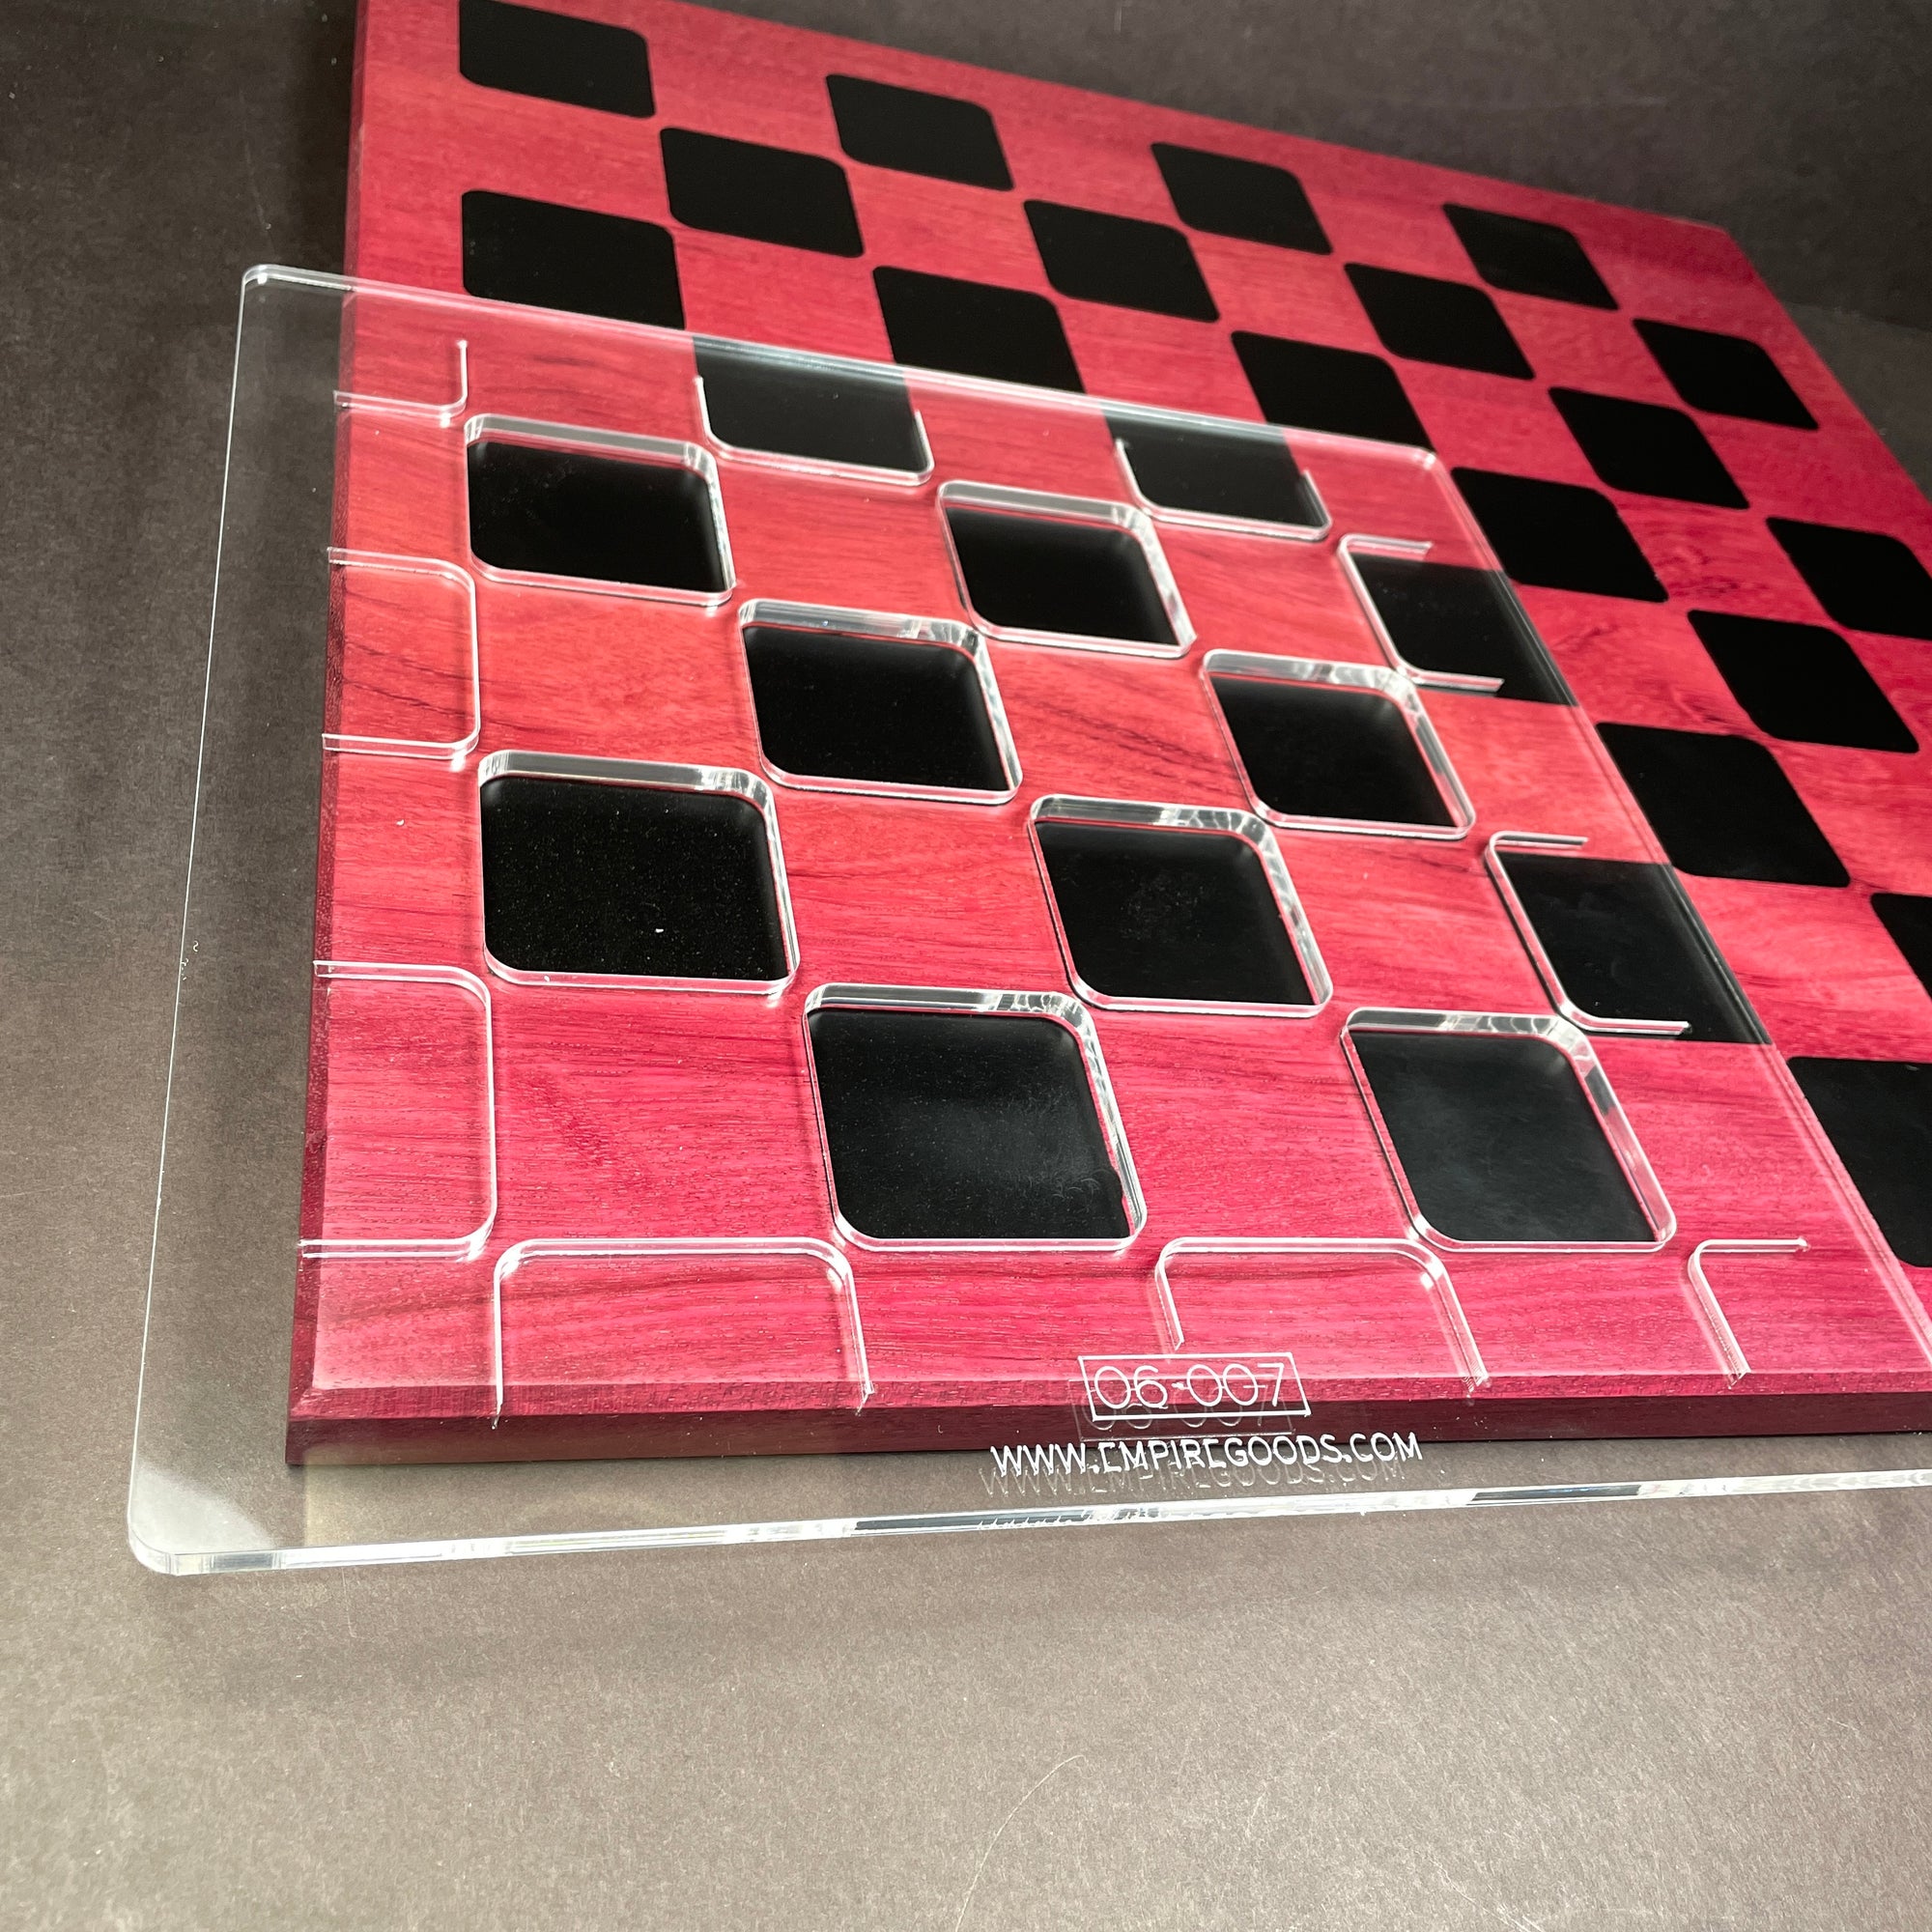 Clear acrylic template sitting on the front left corner of a chess baord